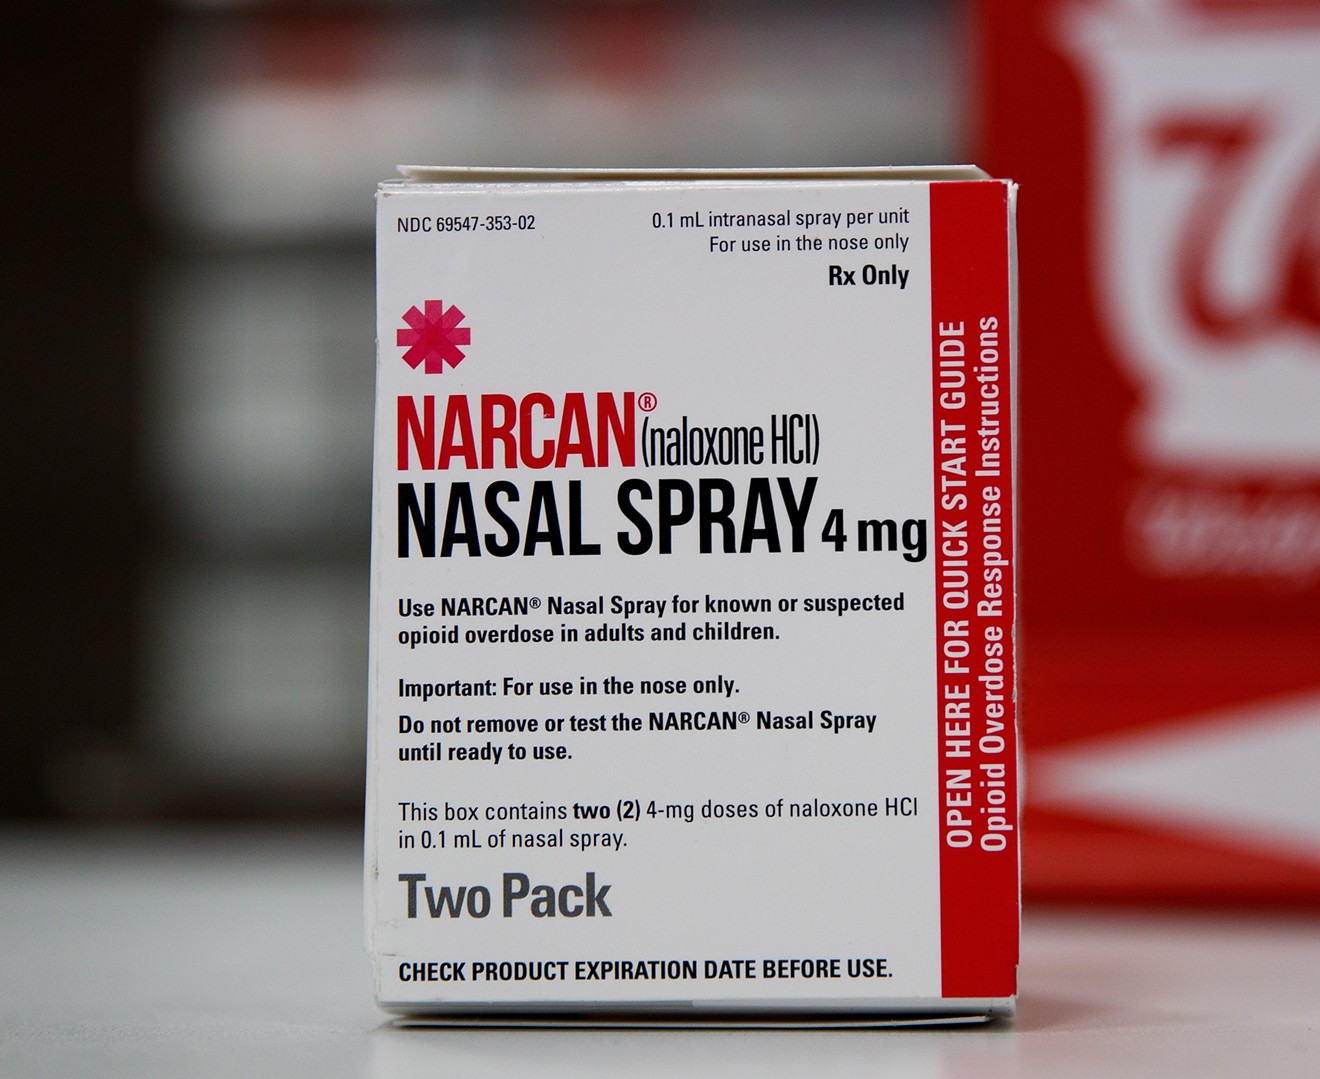 Narcan is an antidote to opioids. Dallas businesses are keeping it on hand in case of overdoses.